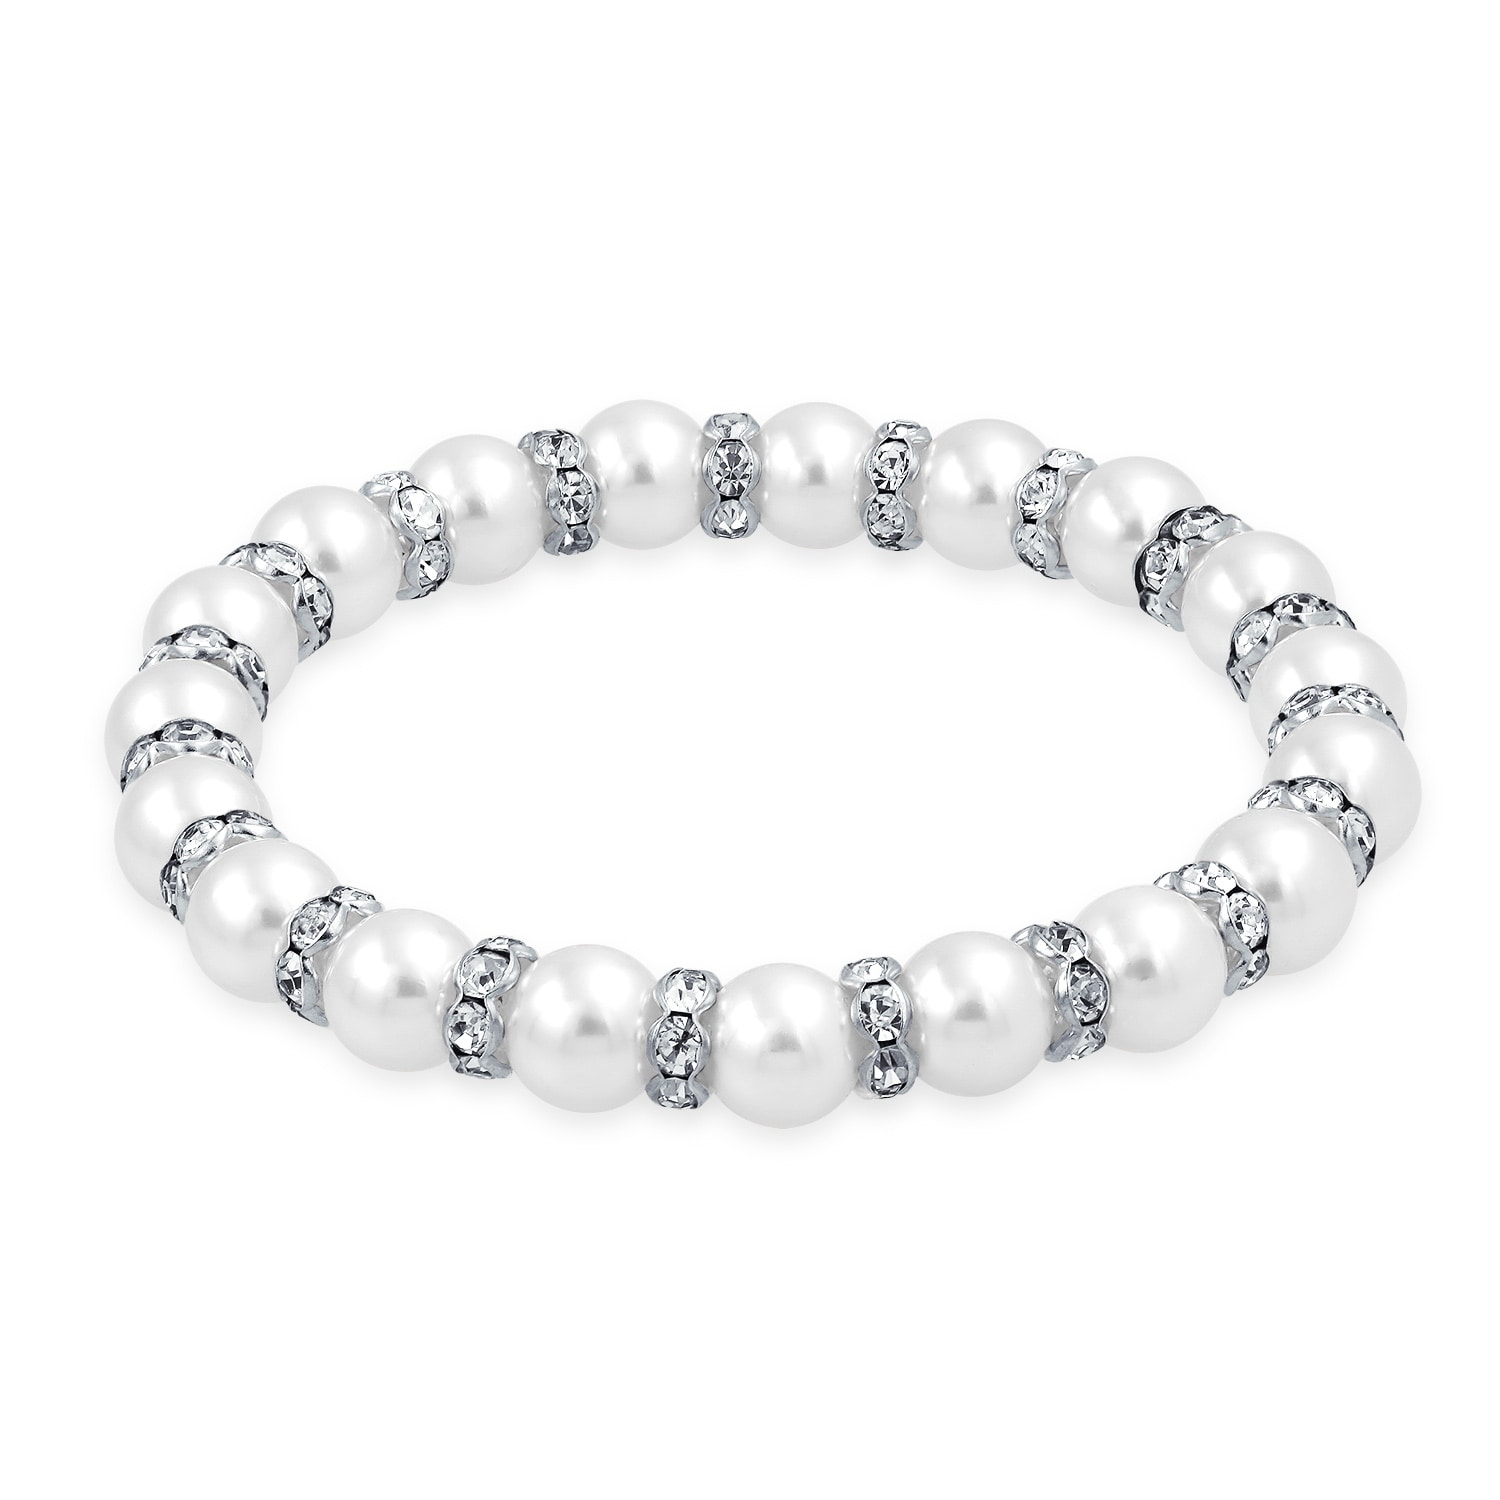 Stretch-to-fit 5 row fresh water pearl bangle bracelet with silver spacing beads 